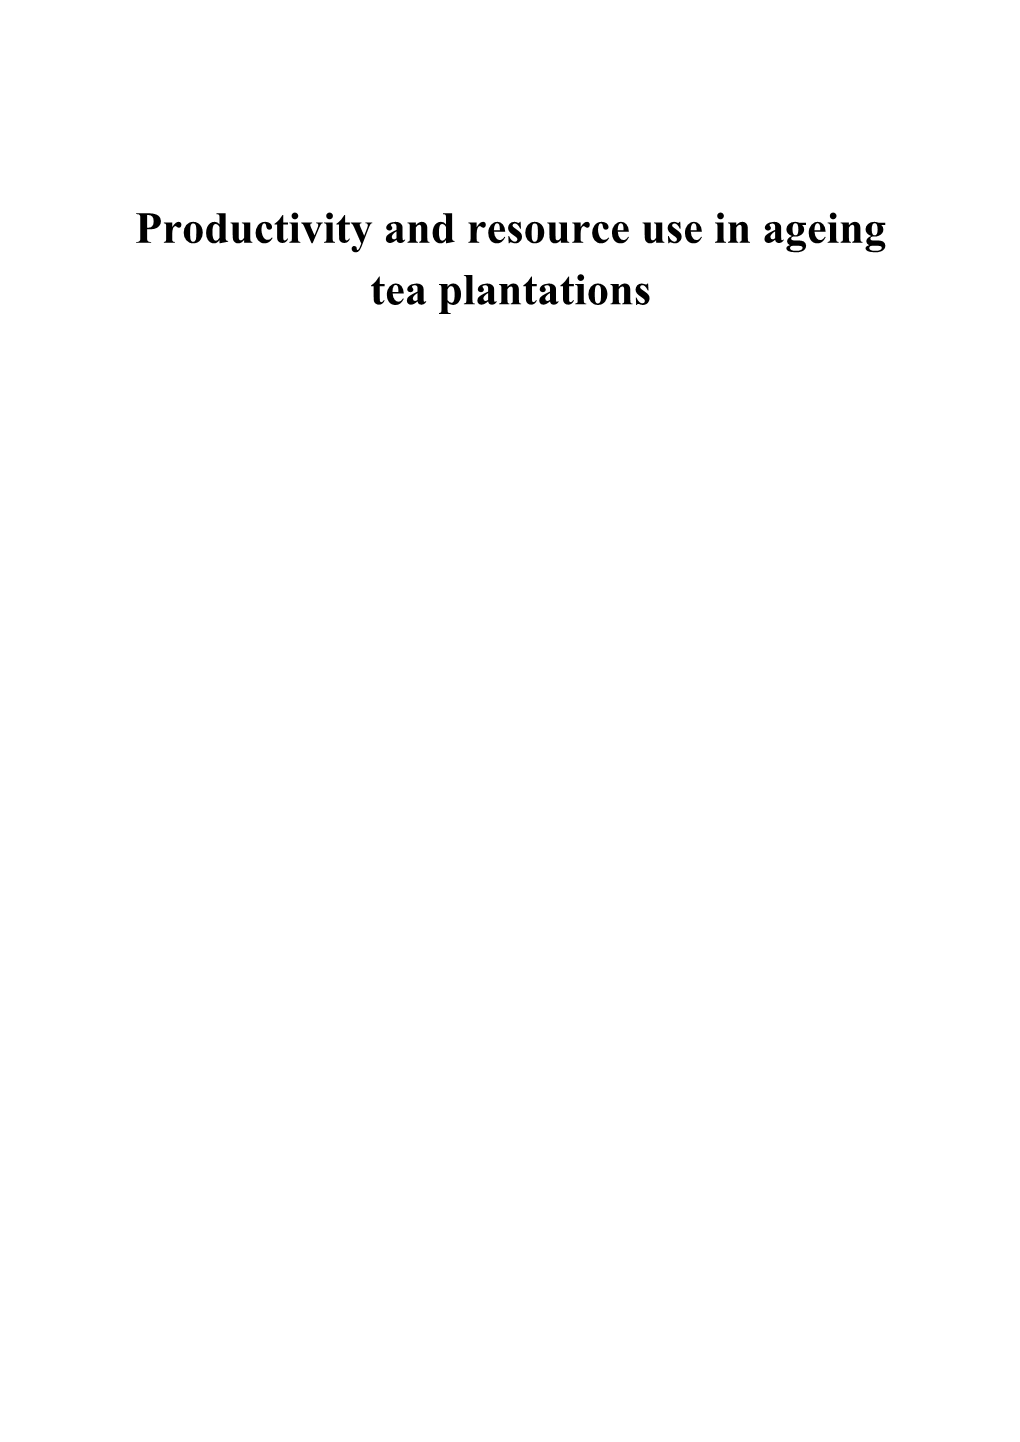 Productivity and Resource Use in Ageing Tea Plantations